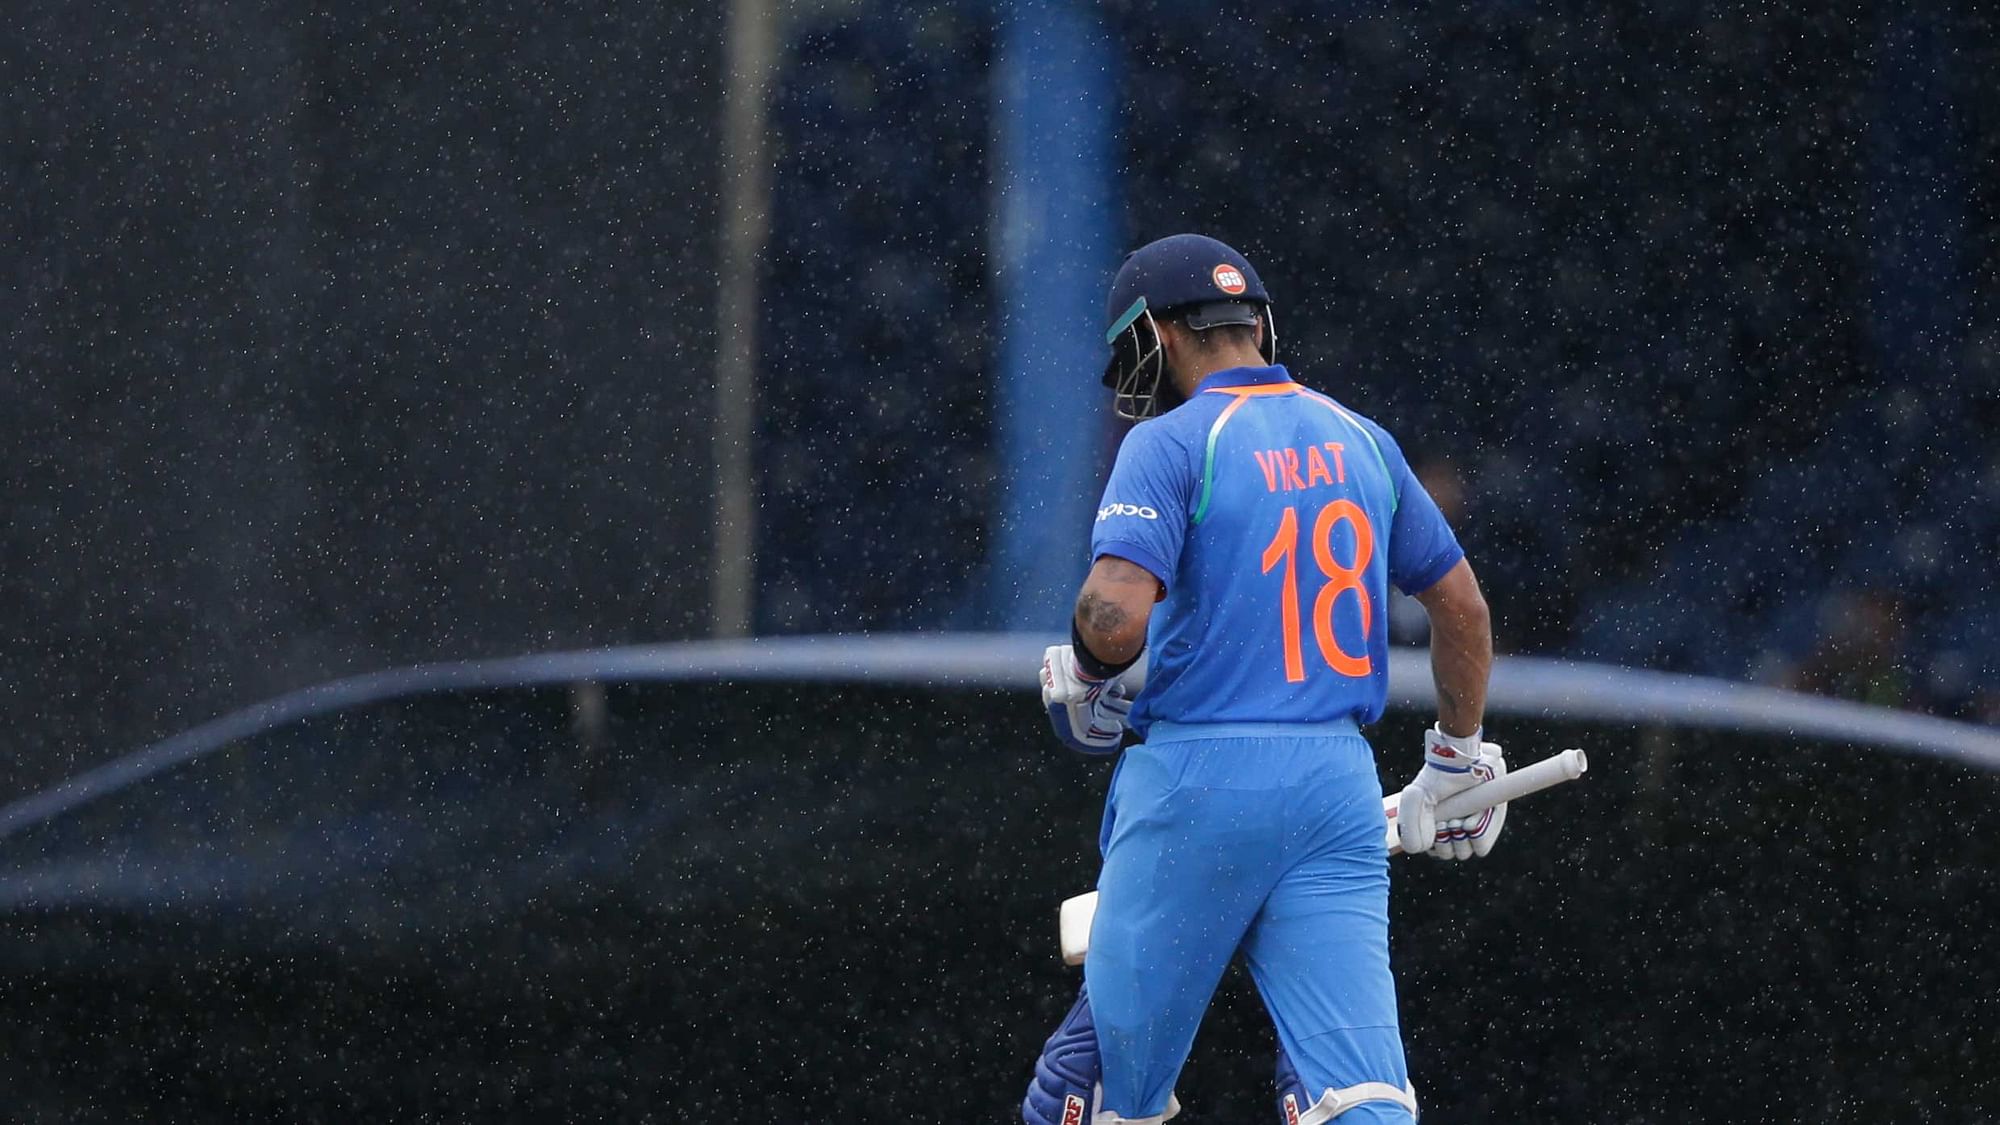 India’s captain Virat Kohli leaves the field as rain delay play for the second time during the first ODI cricket match against West Indies at Queen’s Park Oval. (Photo: AP)